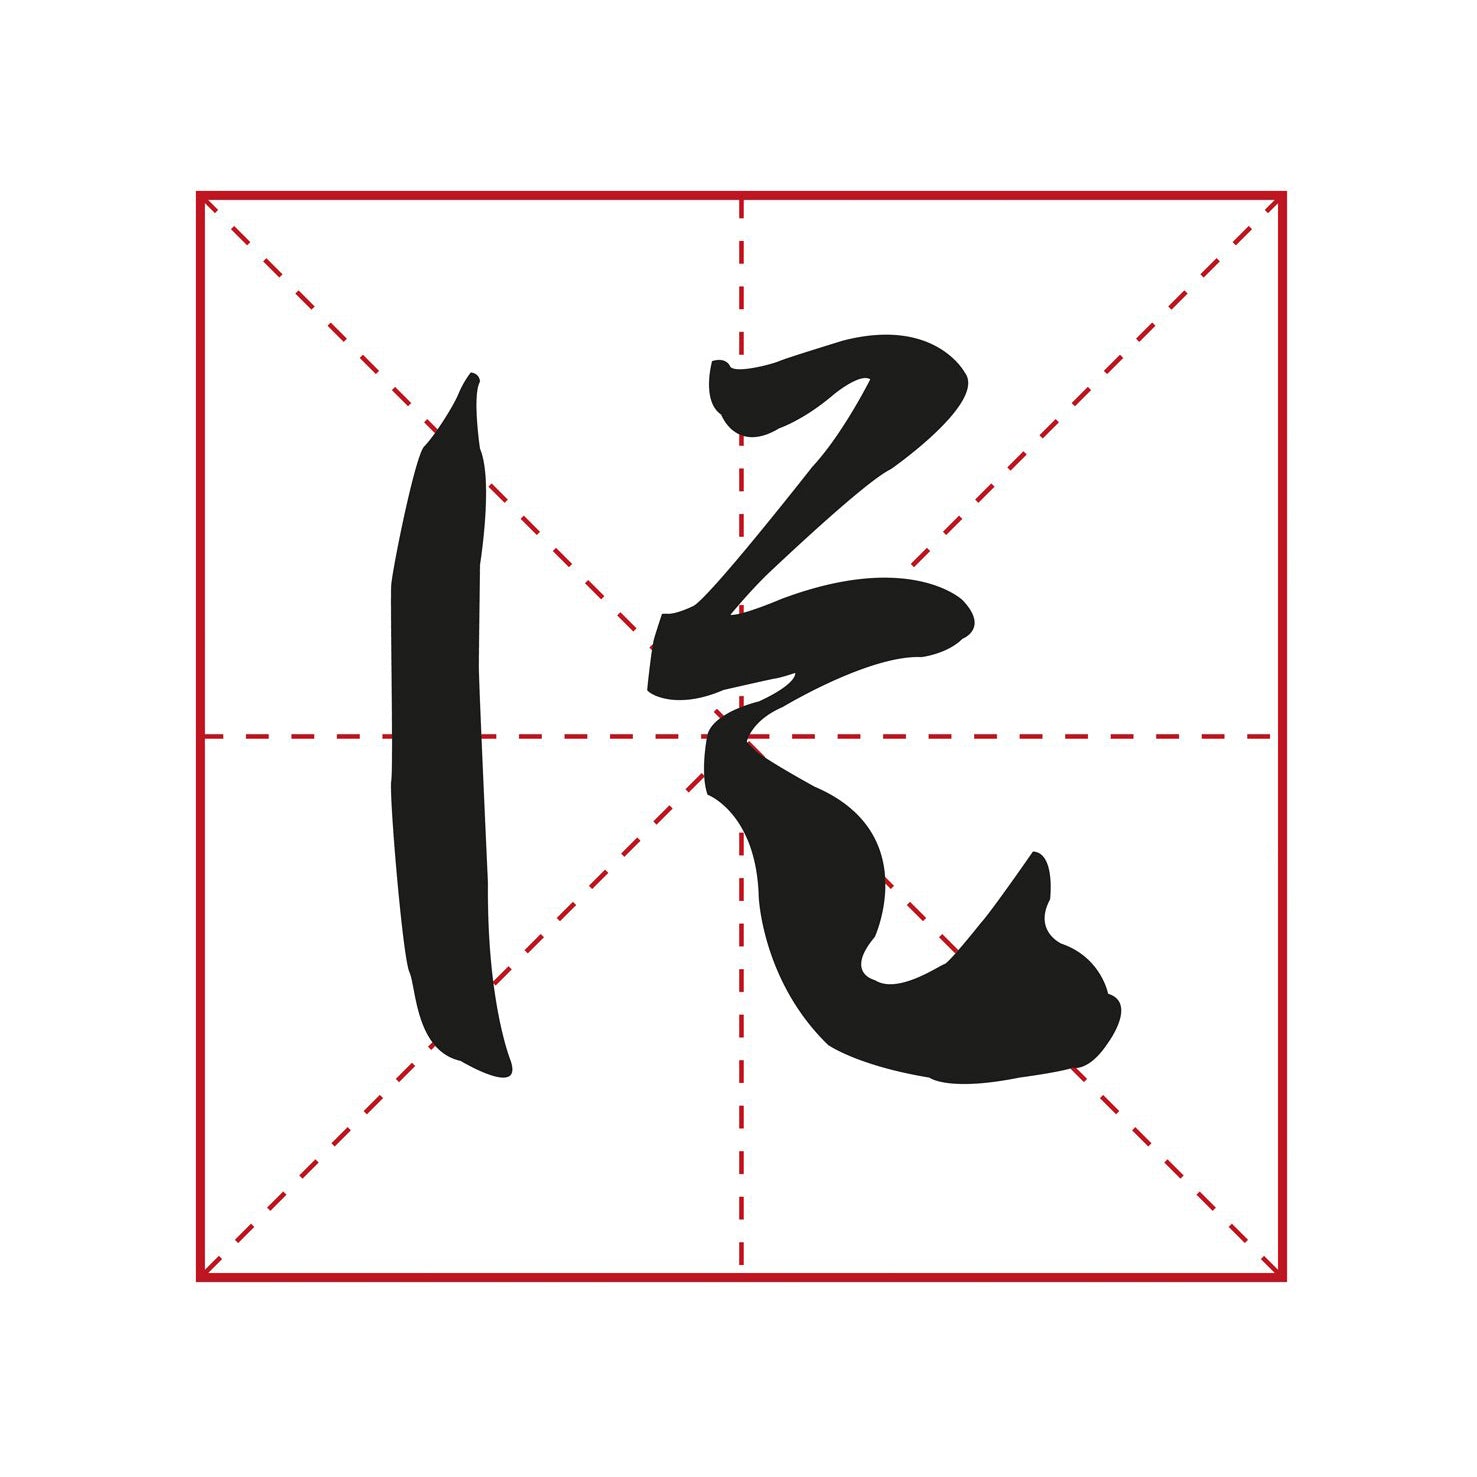 illustration of a chinese character written by the great calligraphist sun guoting in xingshu calligraphy style